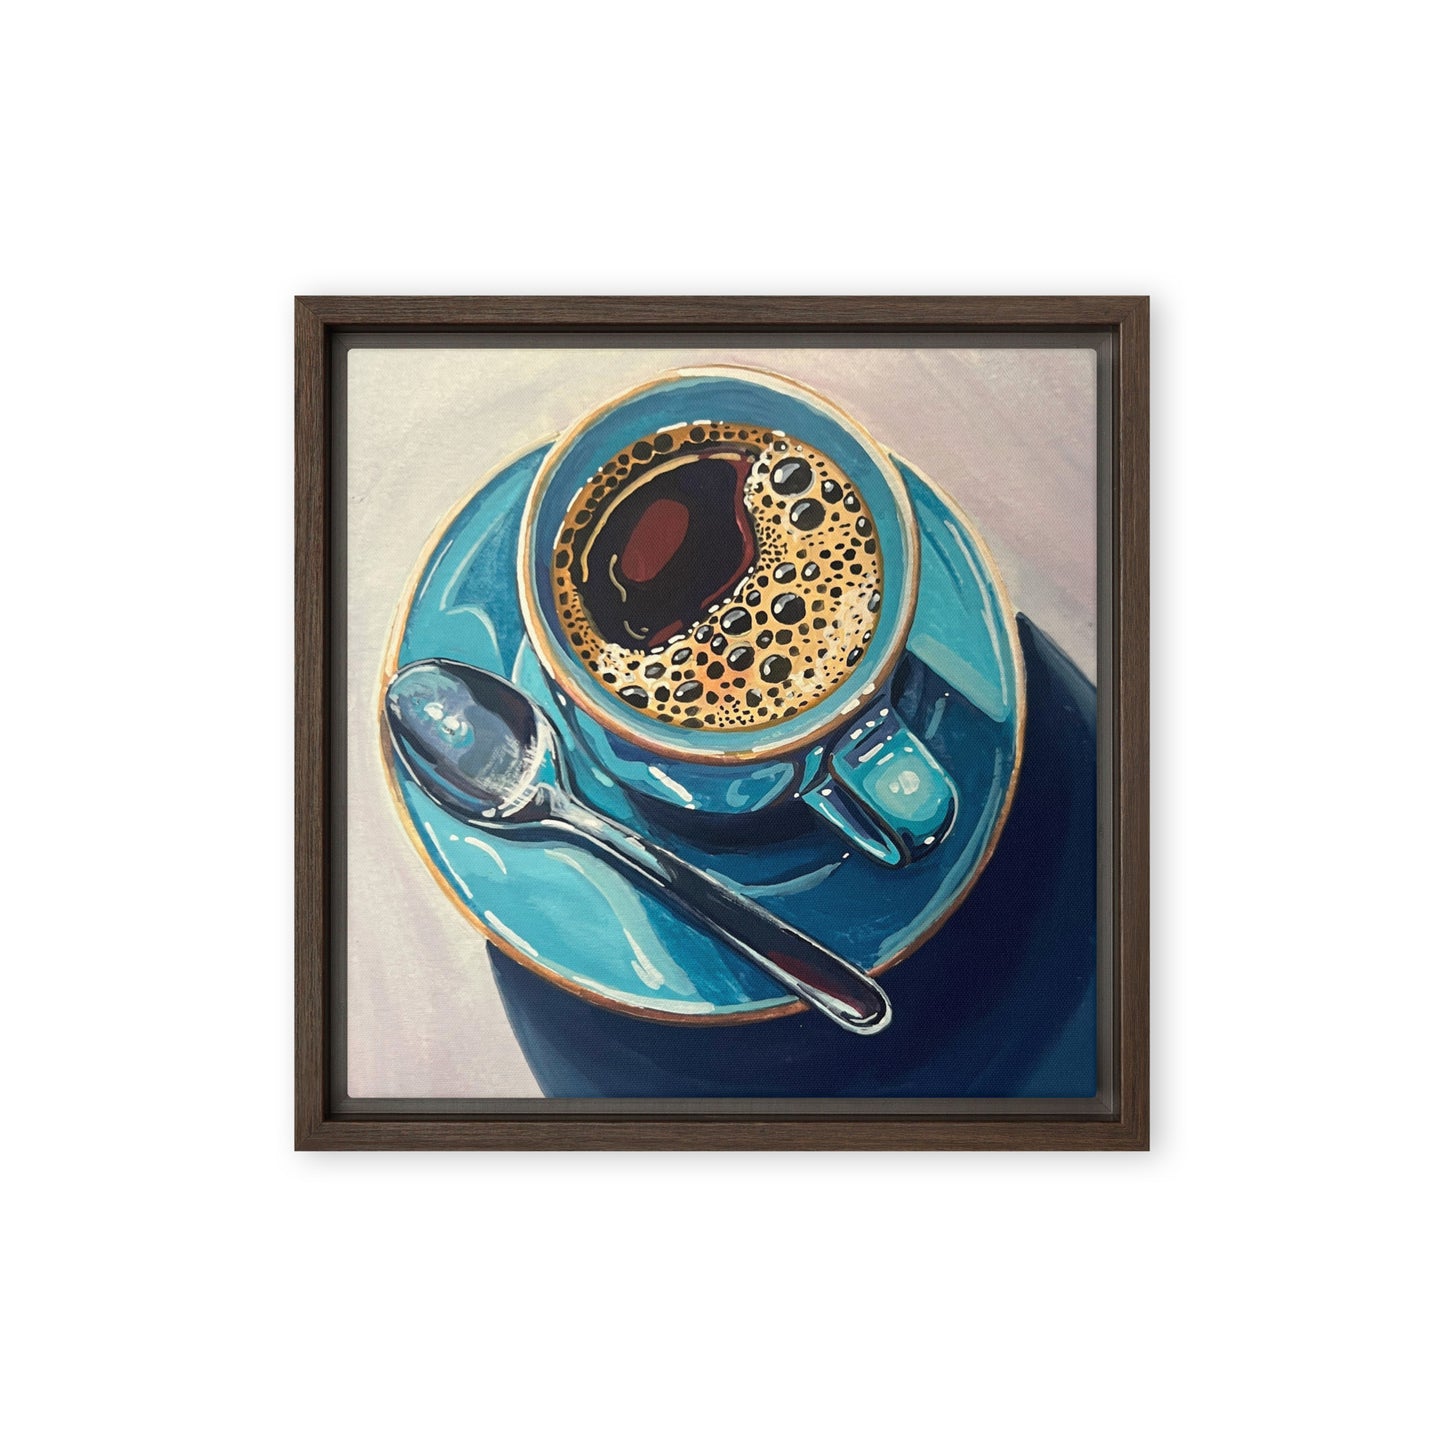 Limited Edition ‘Pour Me Another Cup’ Framed Canvas Print